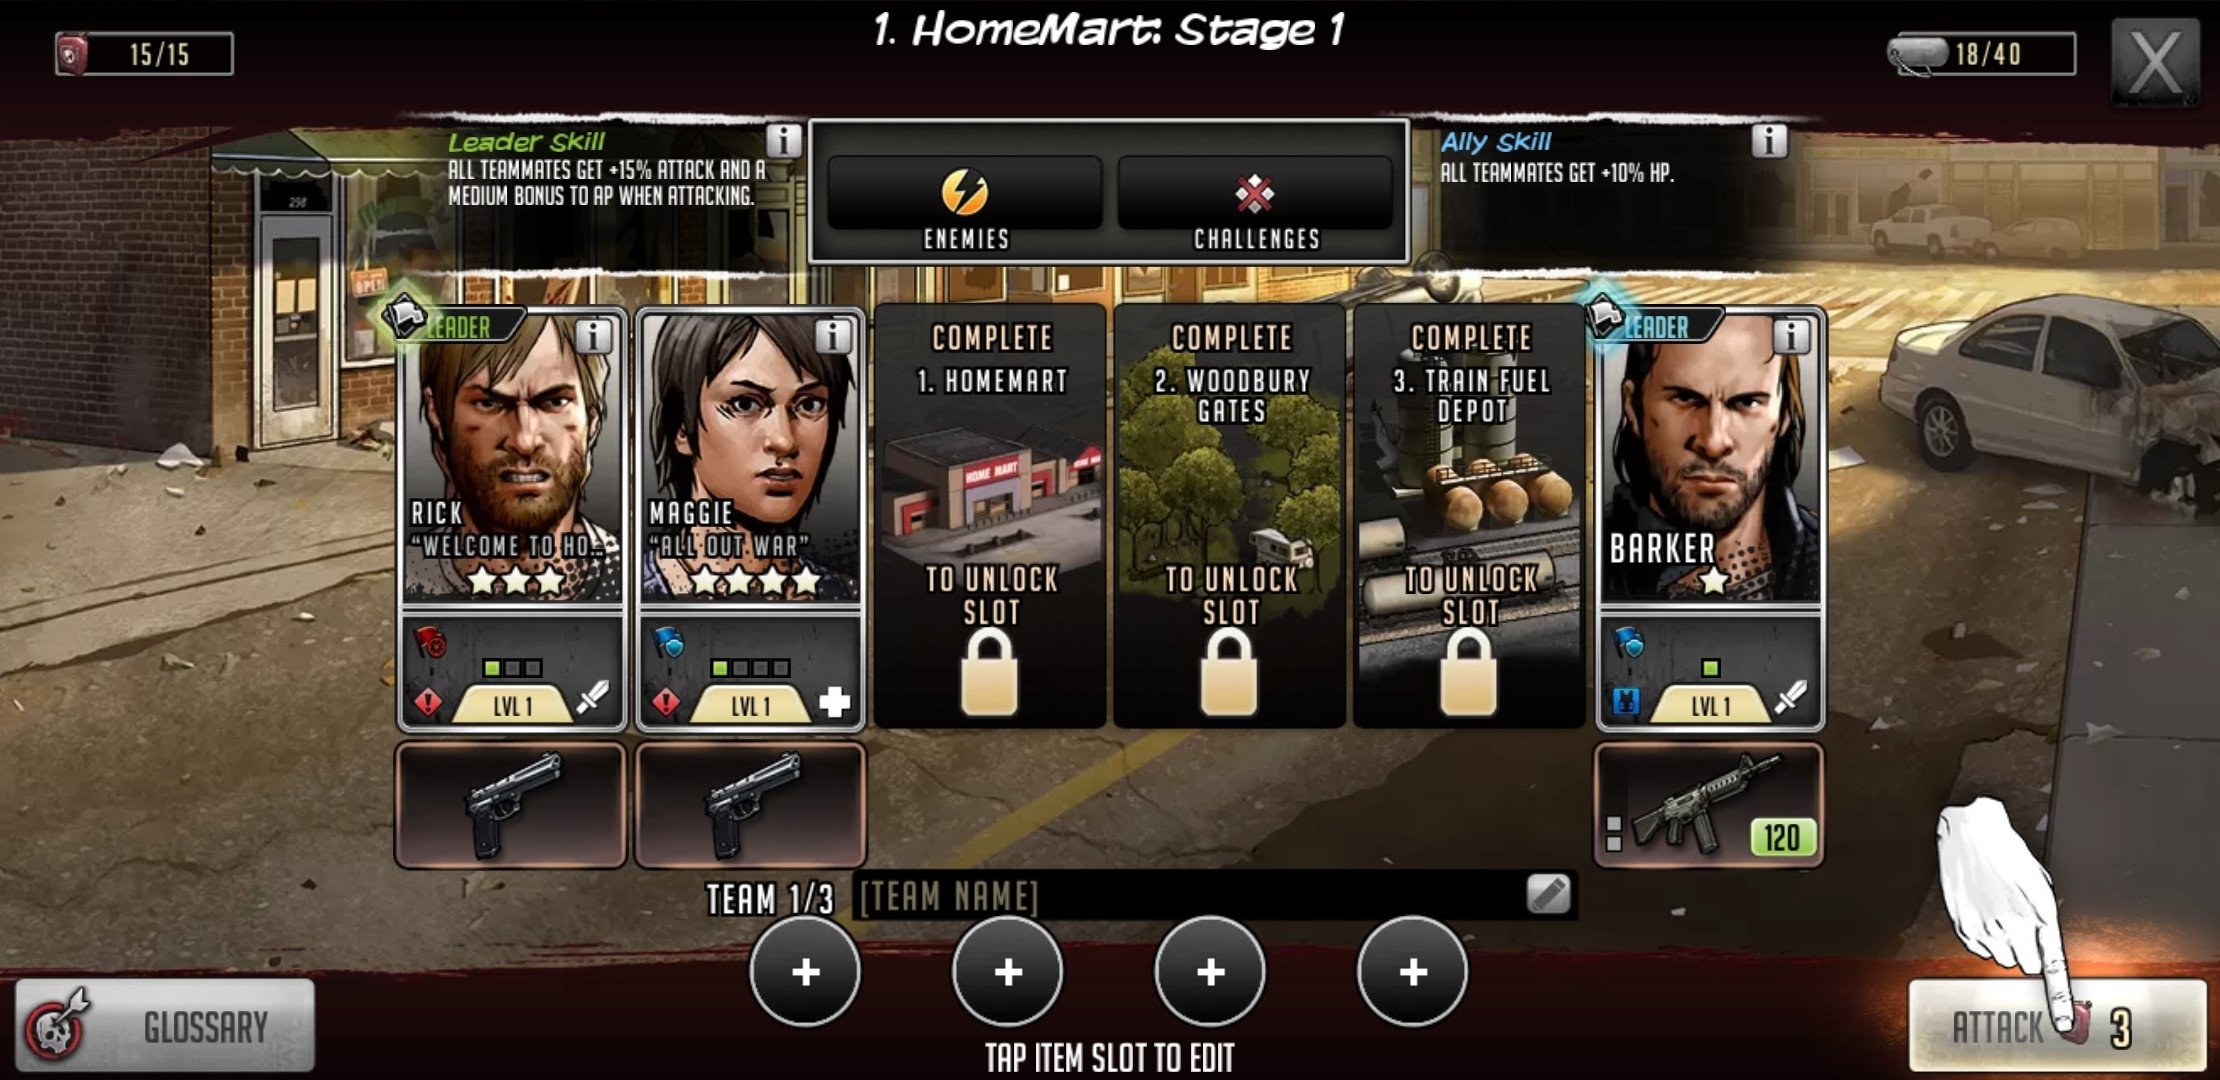 download the walking dead road to survival